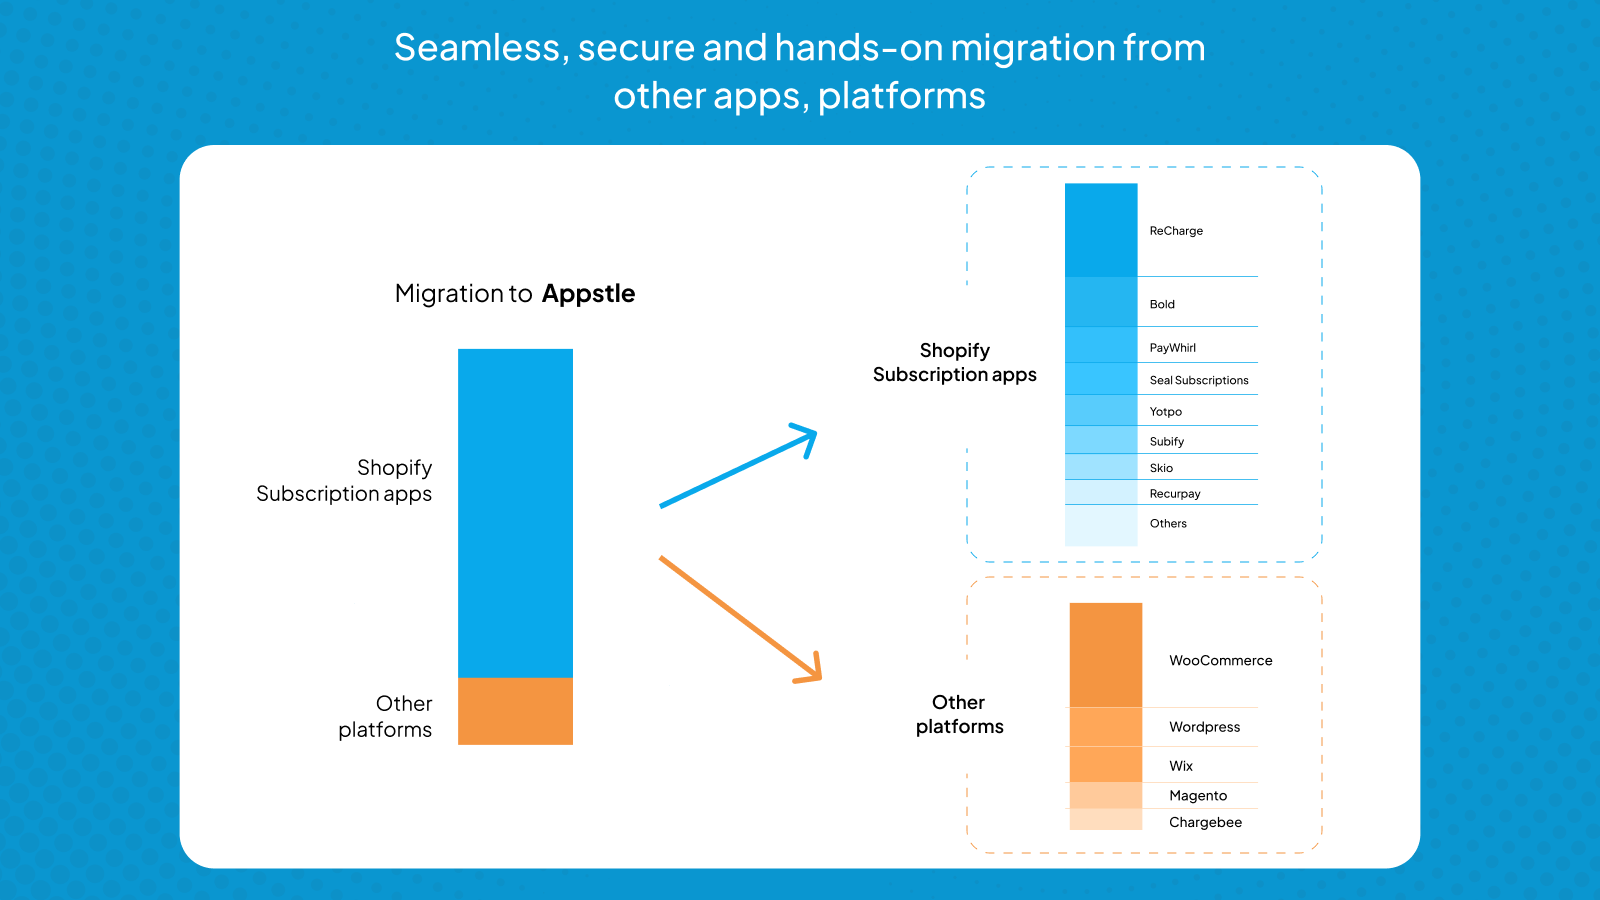 Seamless and hands-on migration from other apps and platforms